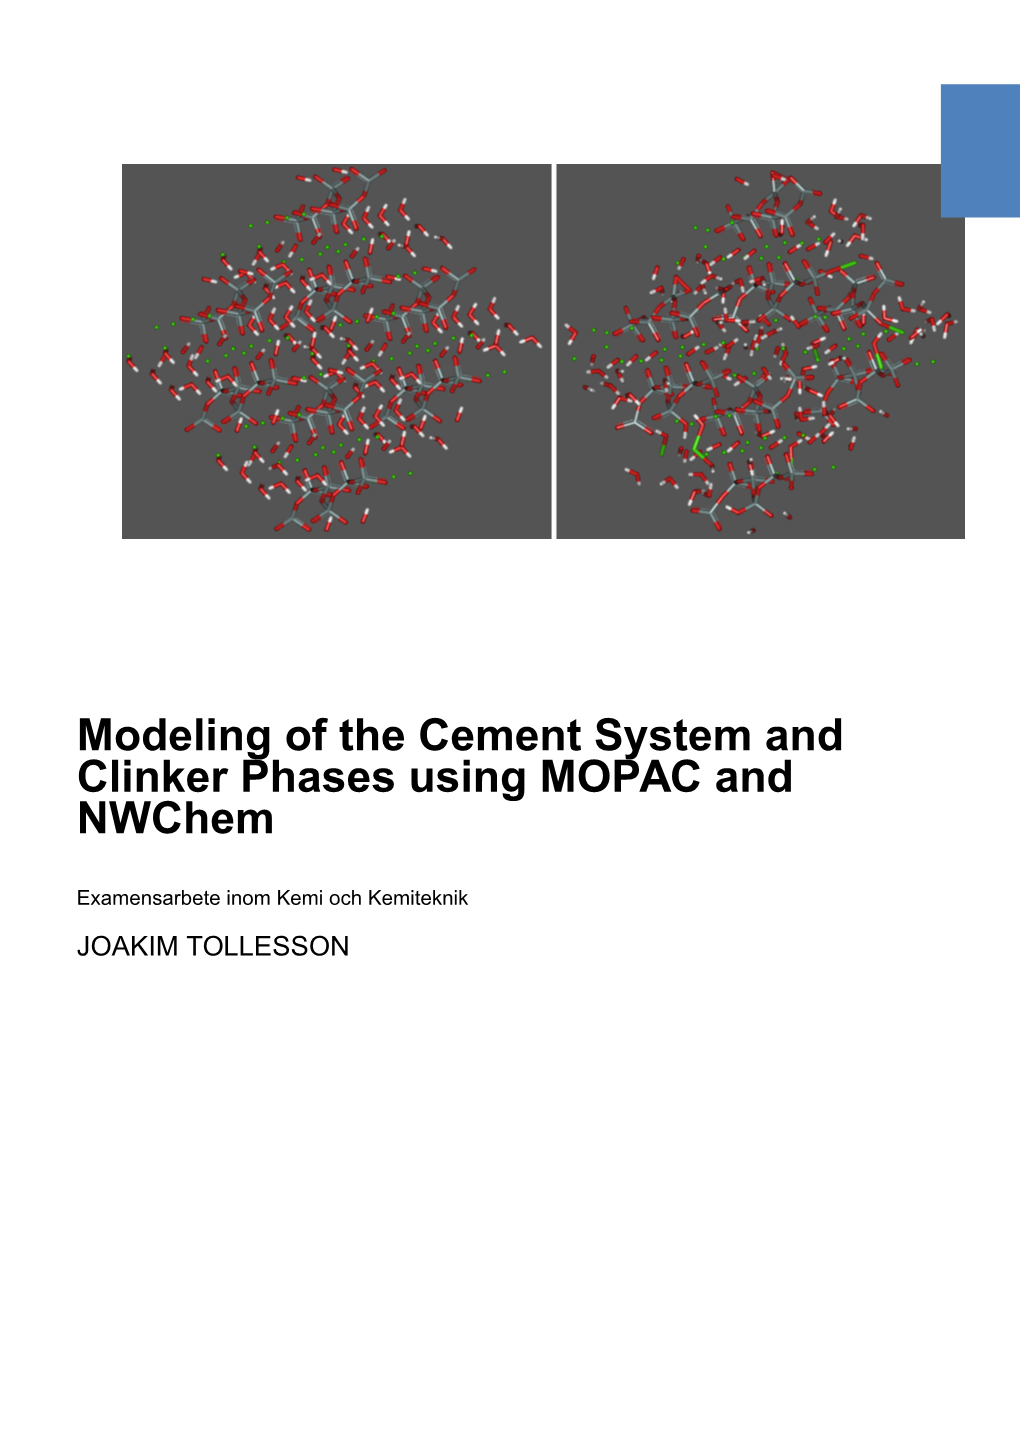 Modeling of the Cement System and Clinker Phases Using MOPAC and Nwchem